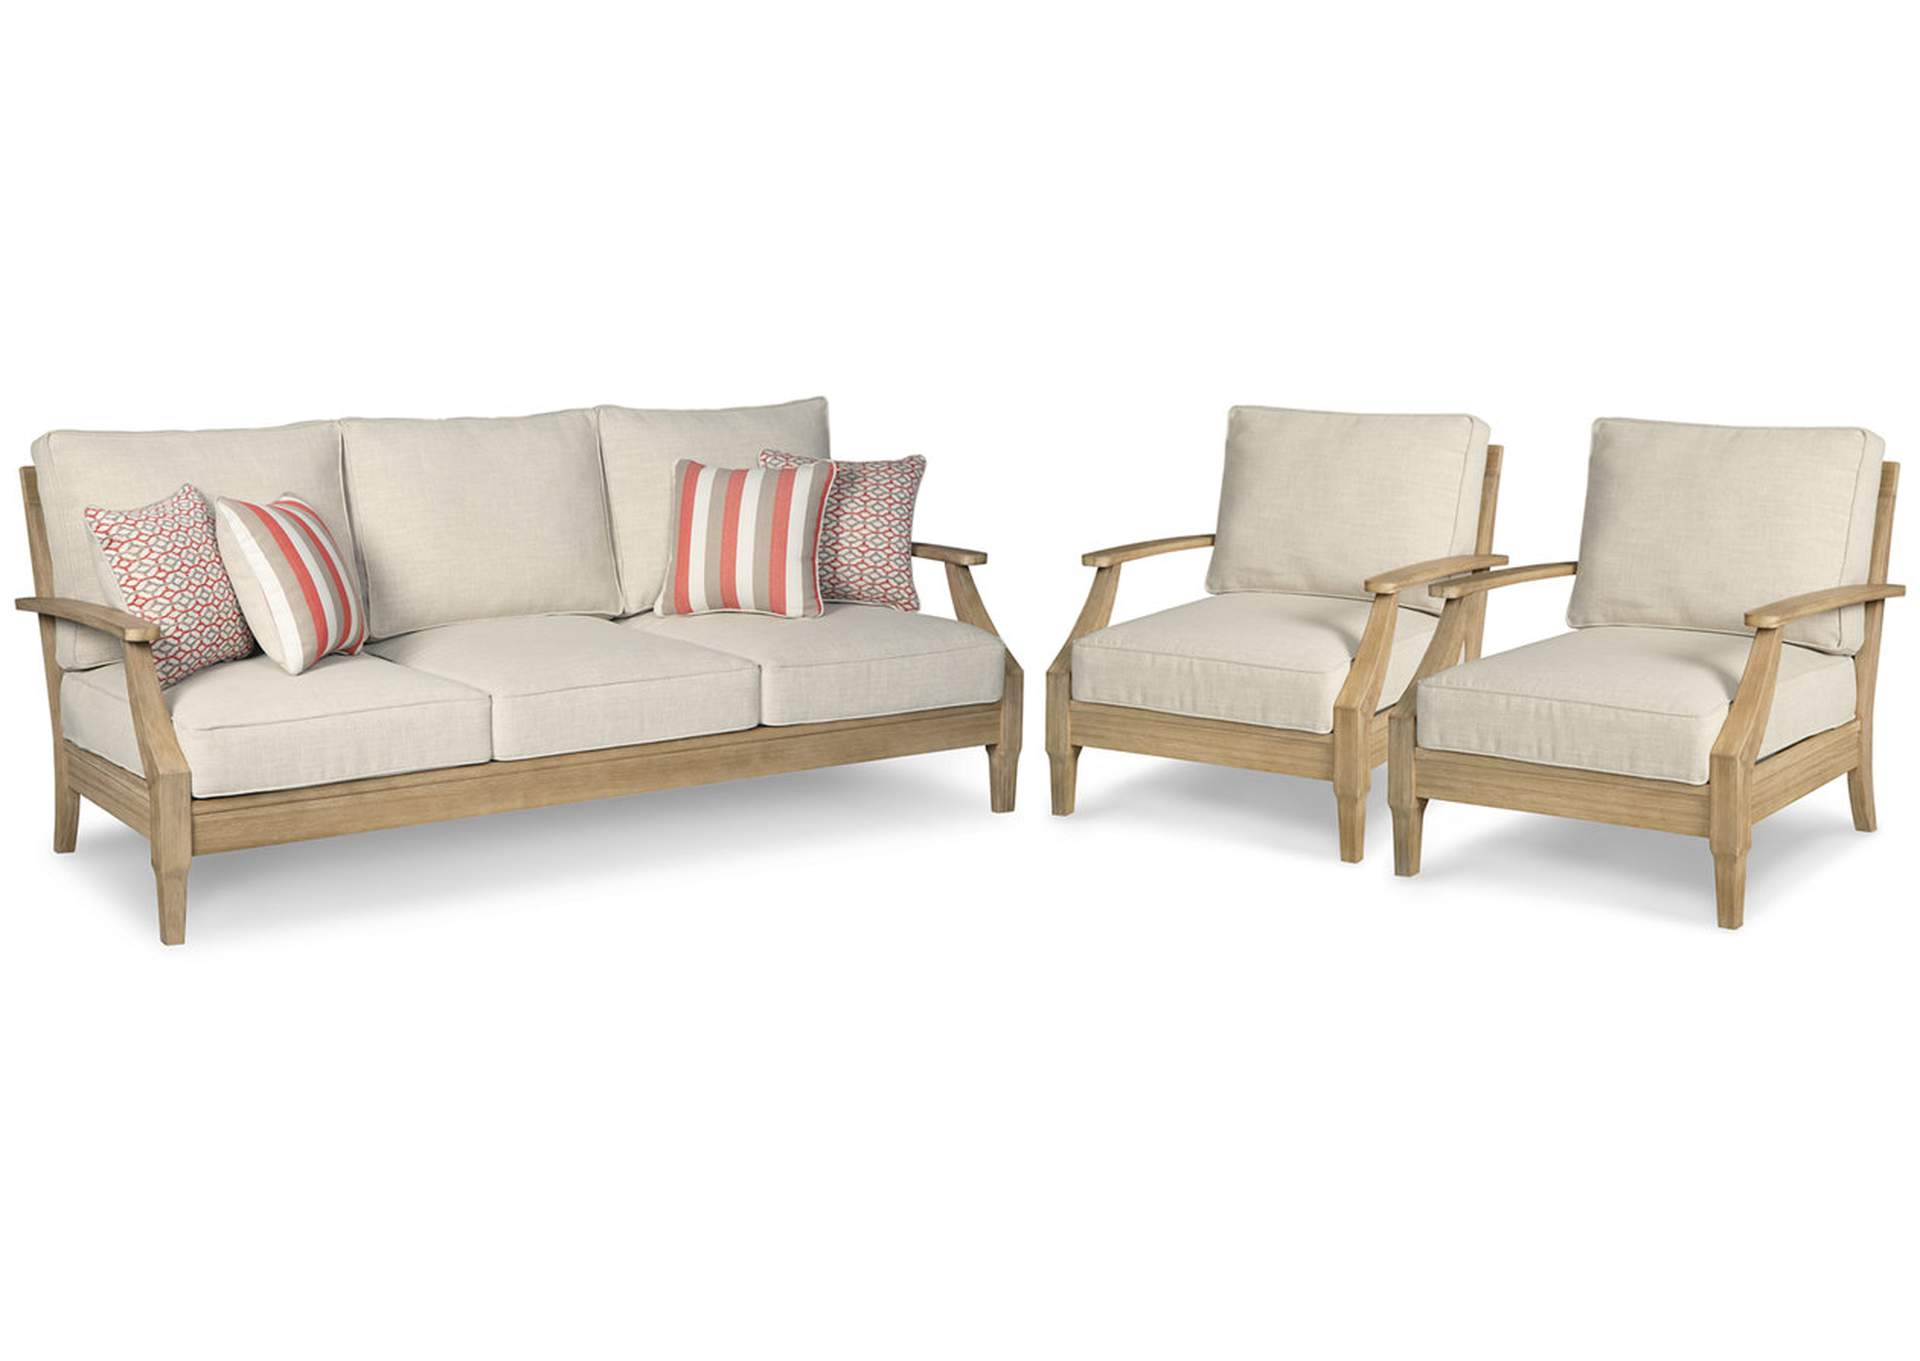 Clare View Outdoor Sofa with 2 Lounge Chairs